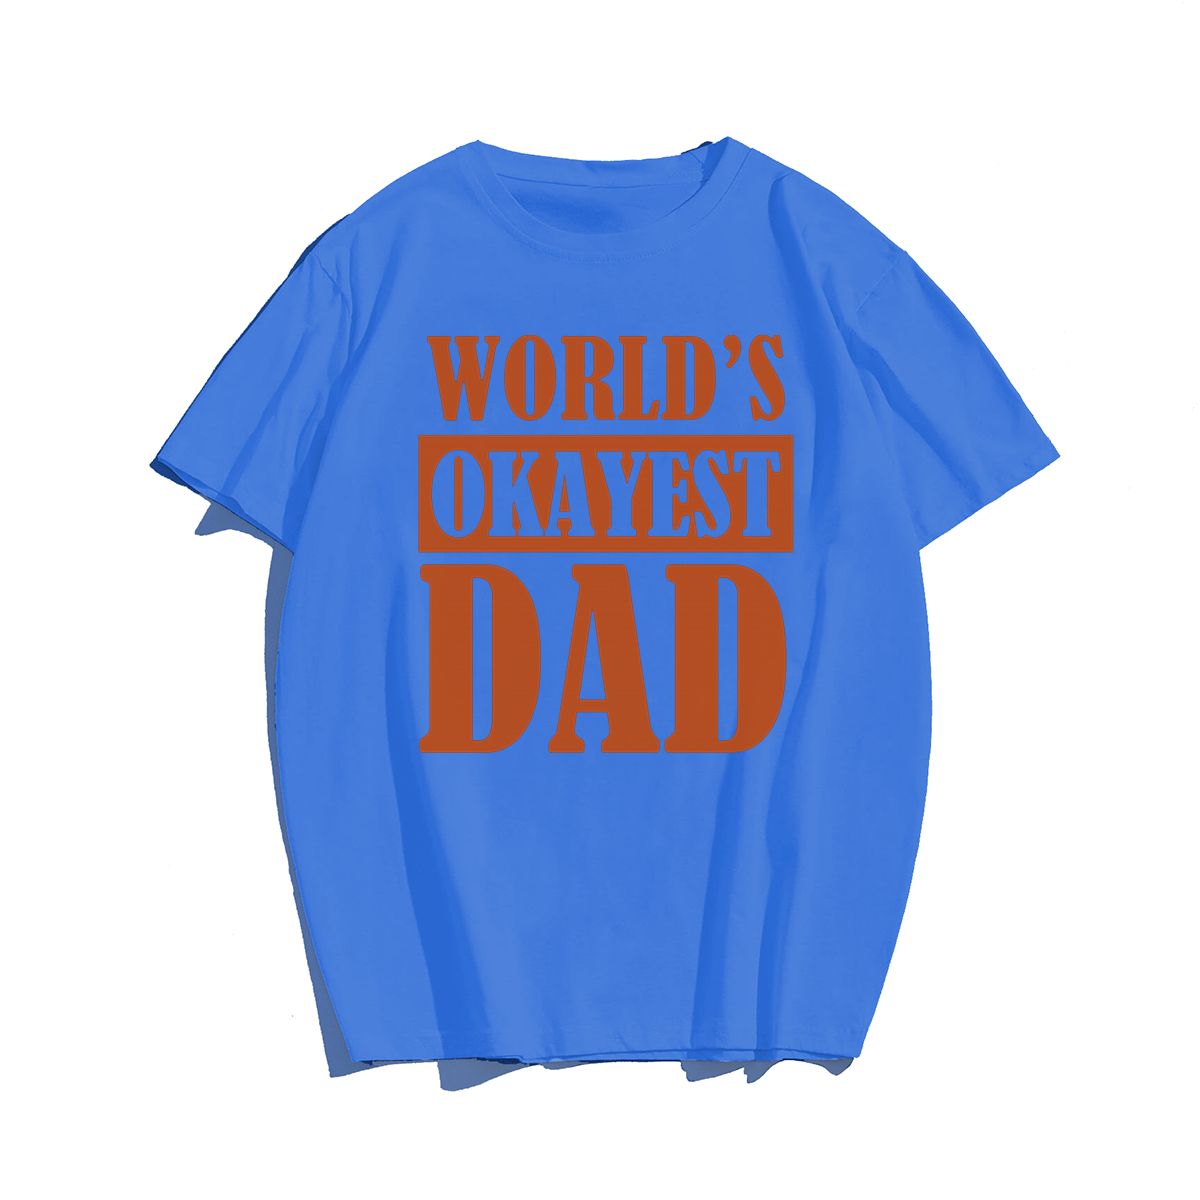 World's Okayest Dad T-shirt for Men, Oversize Plus Size Big & Tall Man Clothing